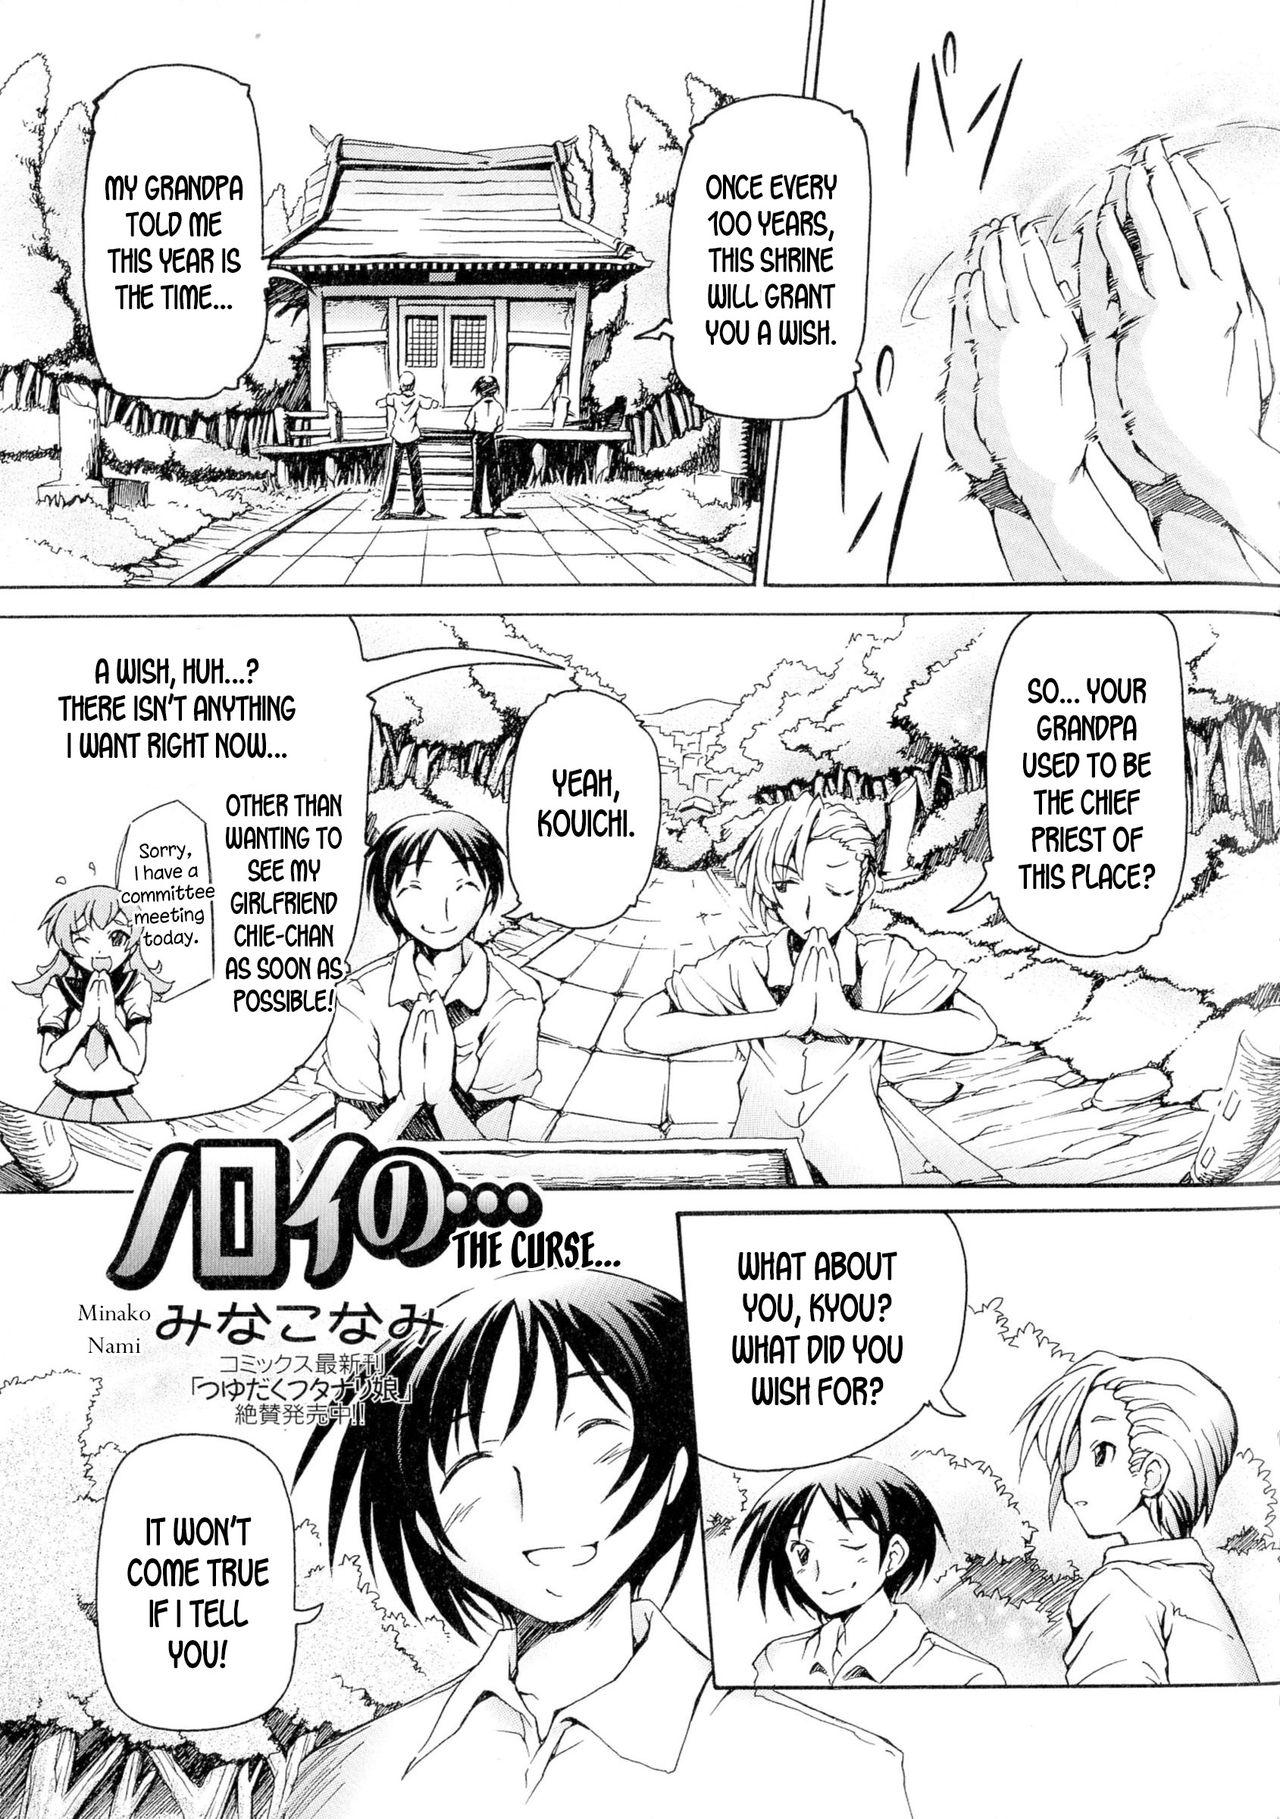 Style Noroi no... | The Curse... Real Sex - Page 1